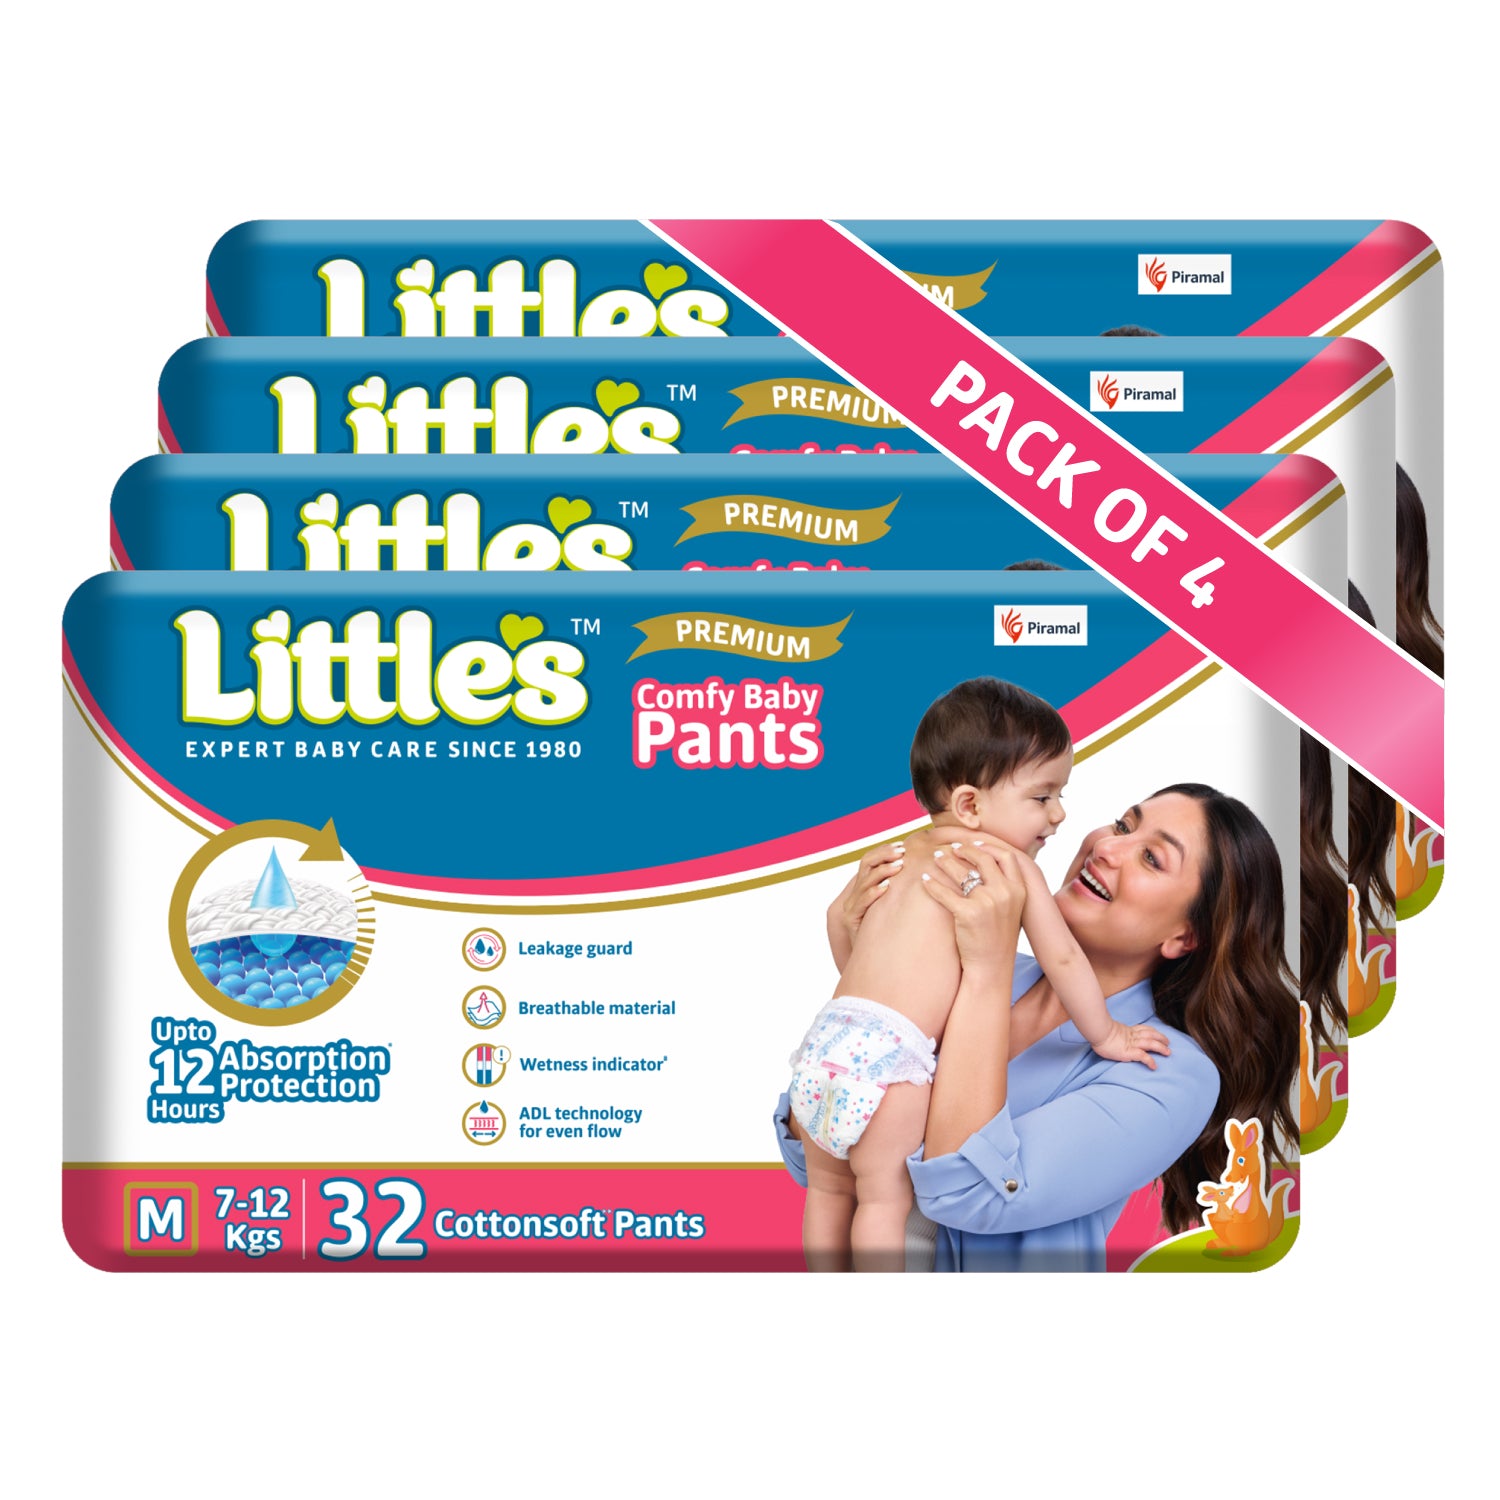 Little's Baby Pants Diapers with Wetness Indicator & 12 Hours Absorption, cottonsoft pants diaper medium pack of 4